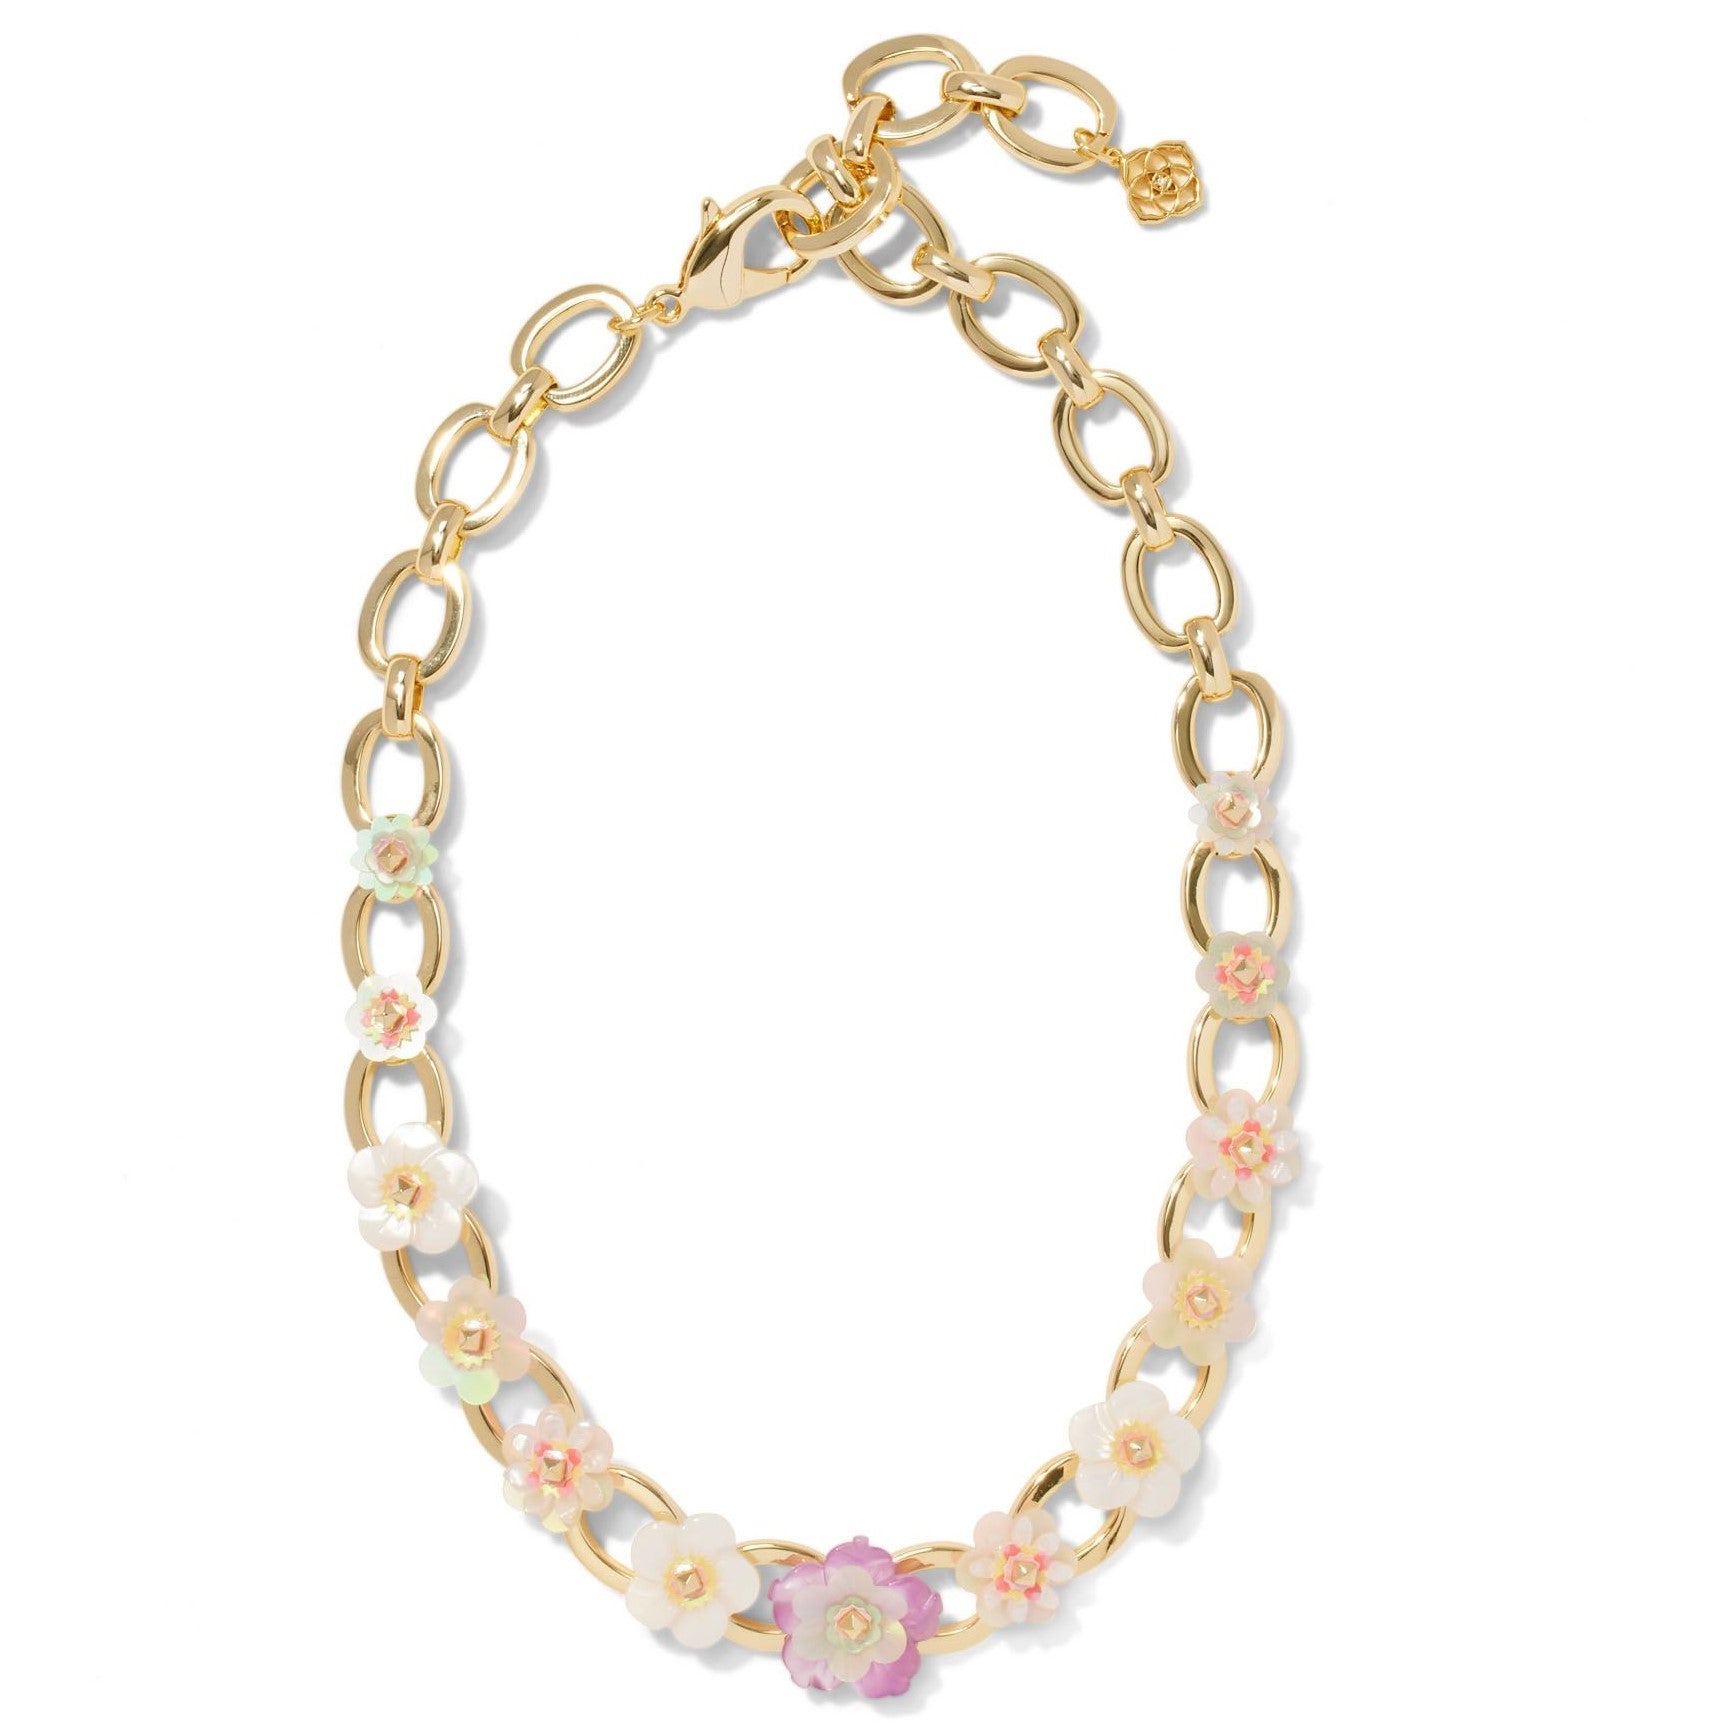 Kendra Scott Daphne Gold Statement Necklace in Light Pink Iridescent  Abalone | The Summit